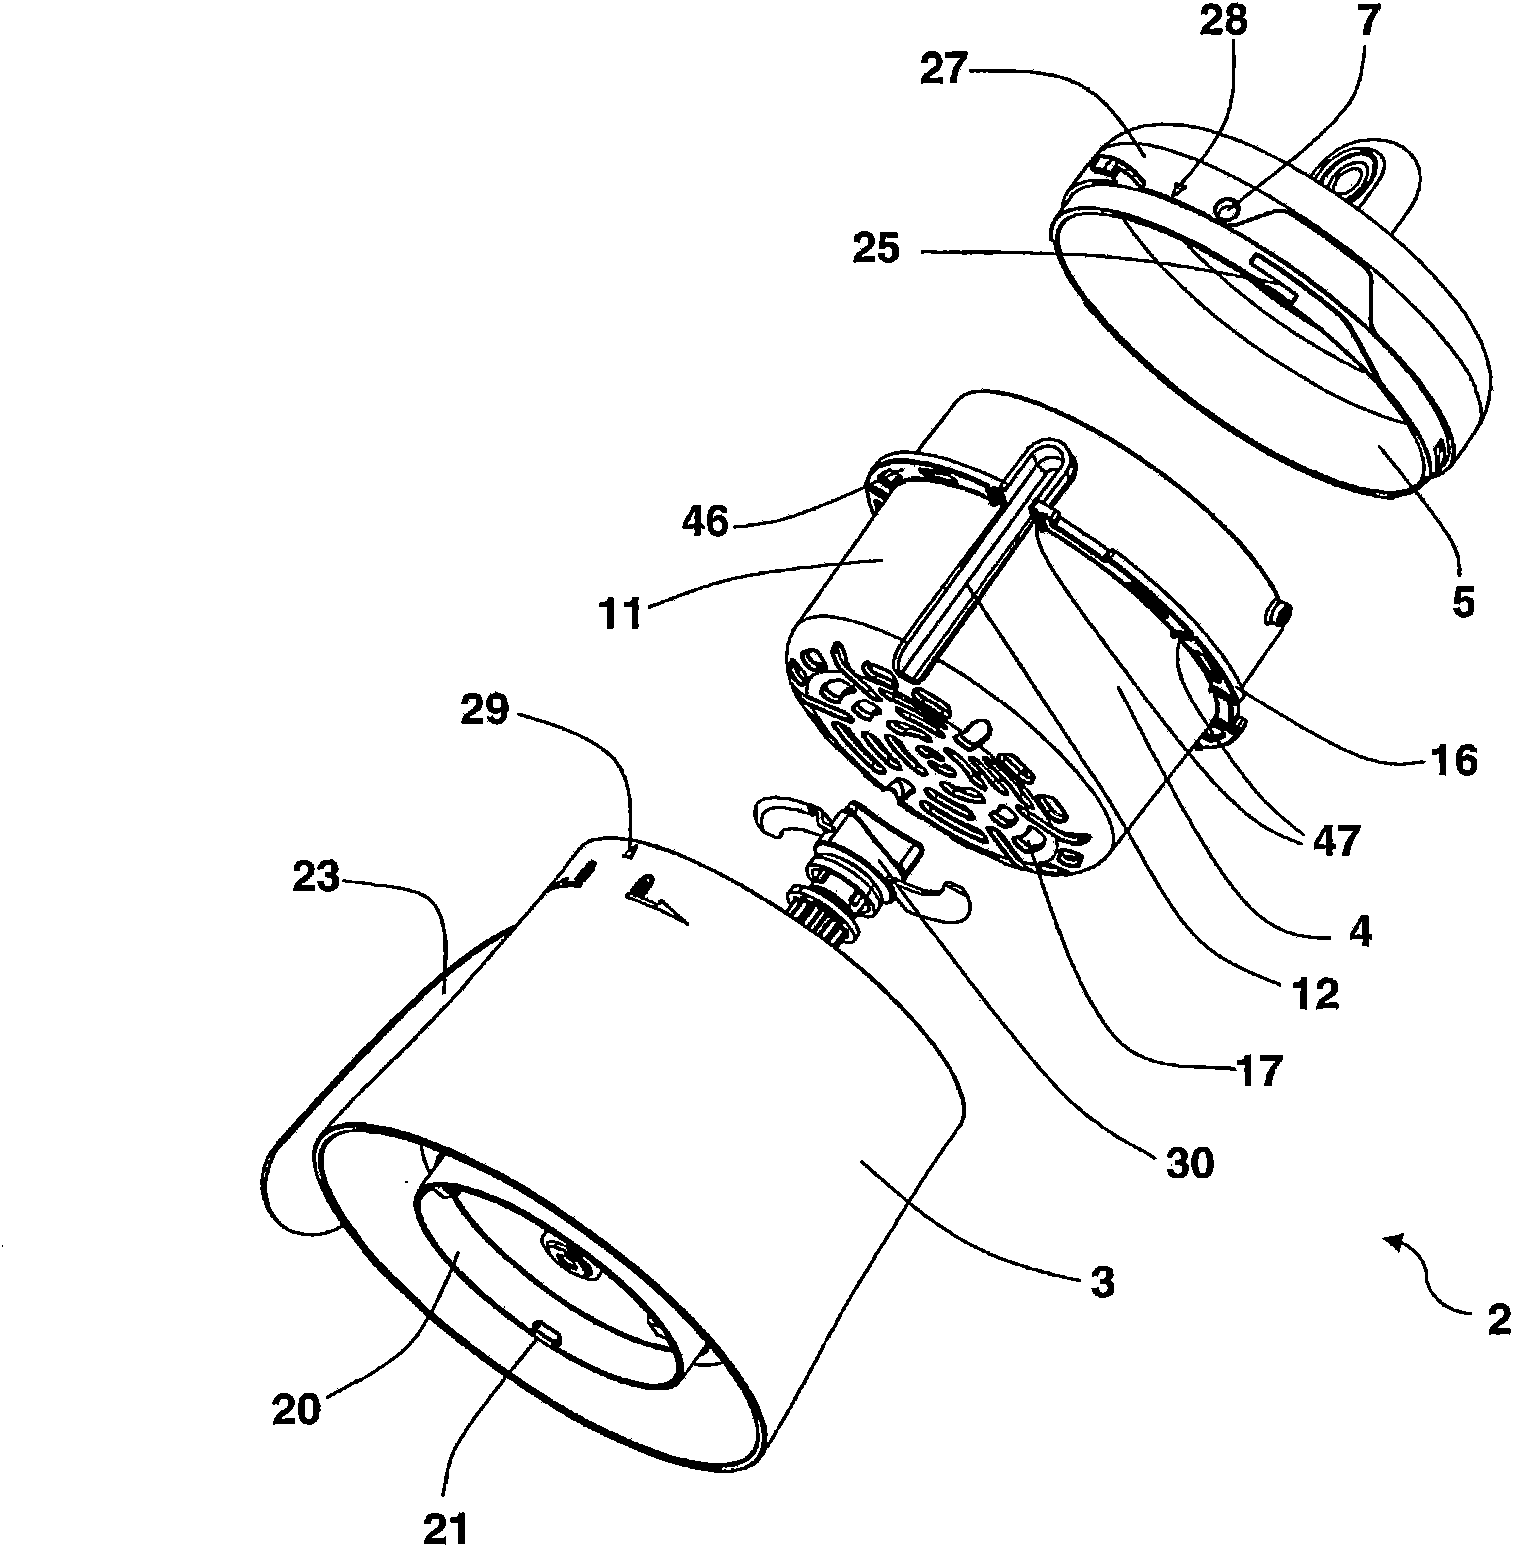 Apparatus for the steam preparation of foodstuffs